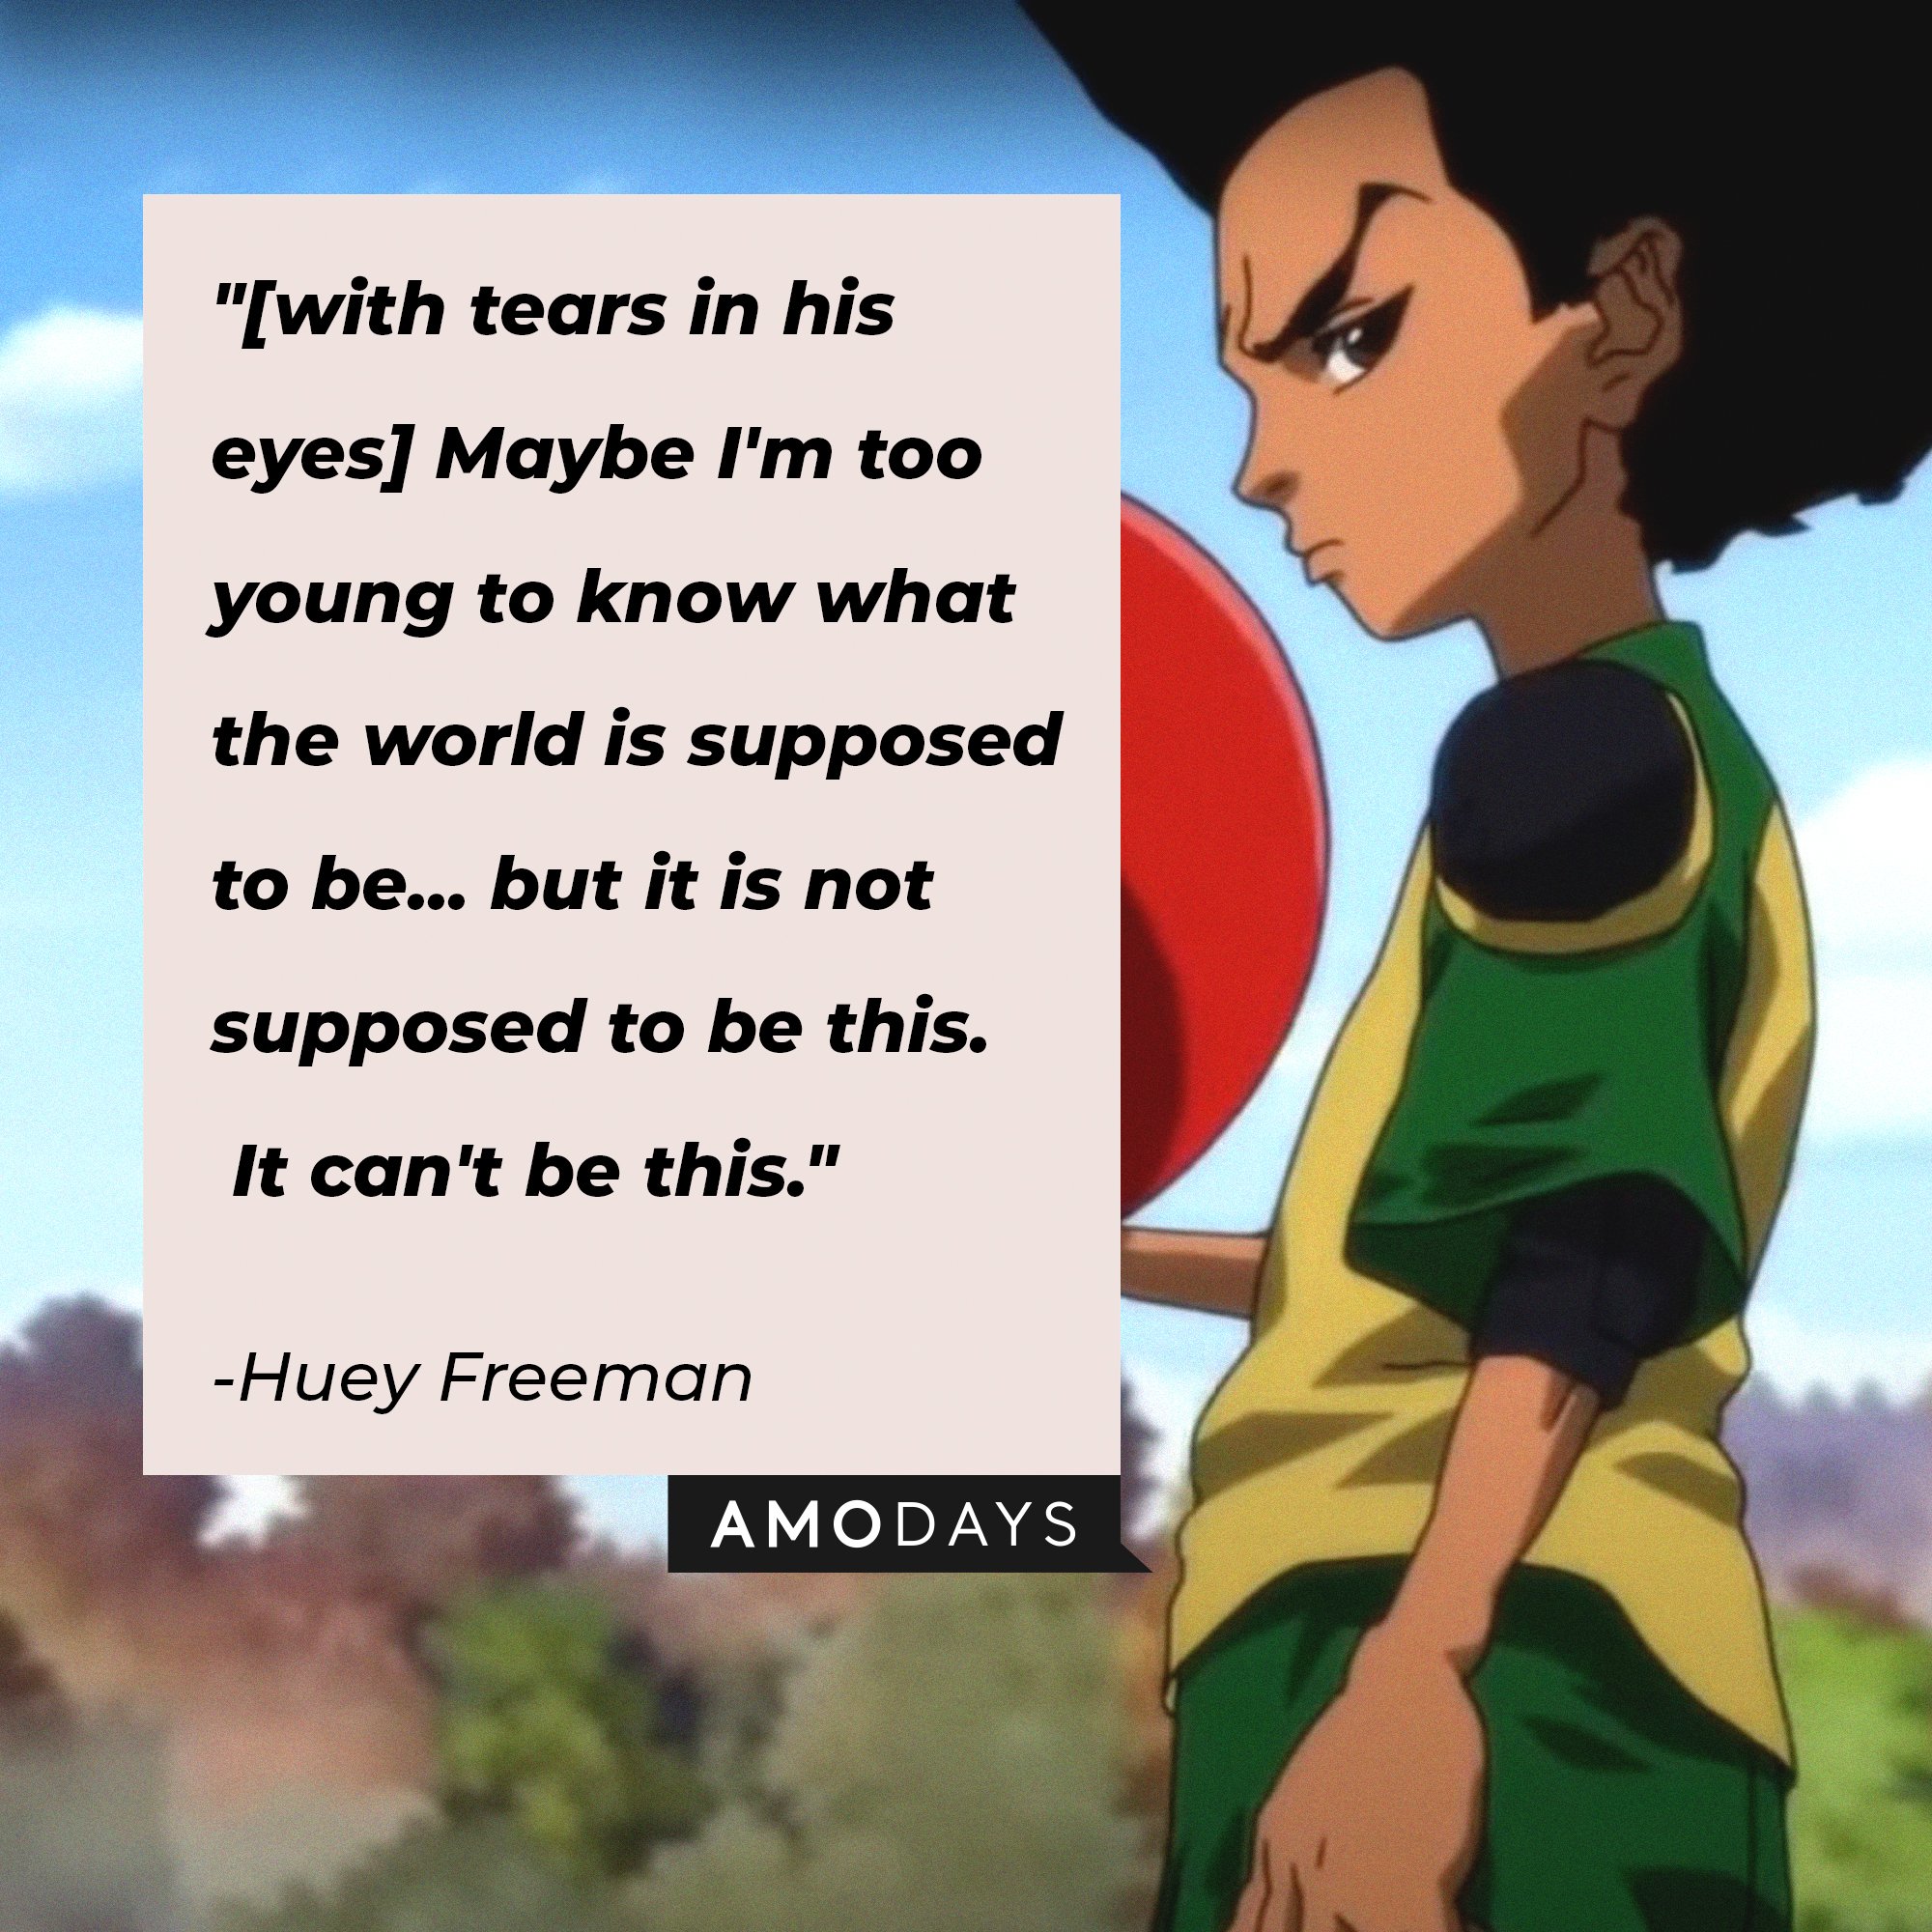 Huey Freeman's quote:  "[with tears in his eyes] Maybe I'm too young to know what the world is supposed to be... but it is not supposed to be this. It can't be this." | Image: AmoDays